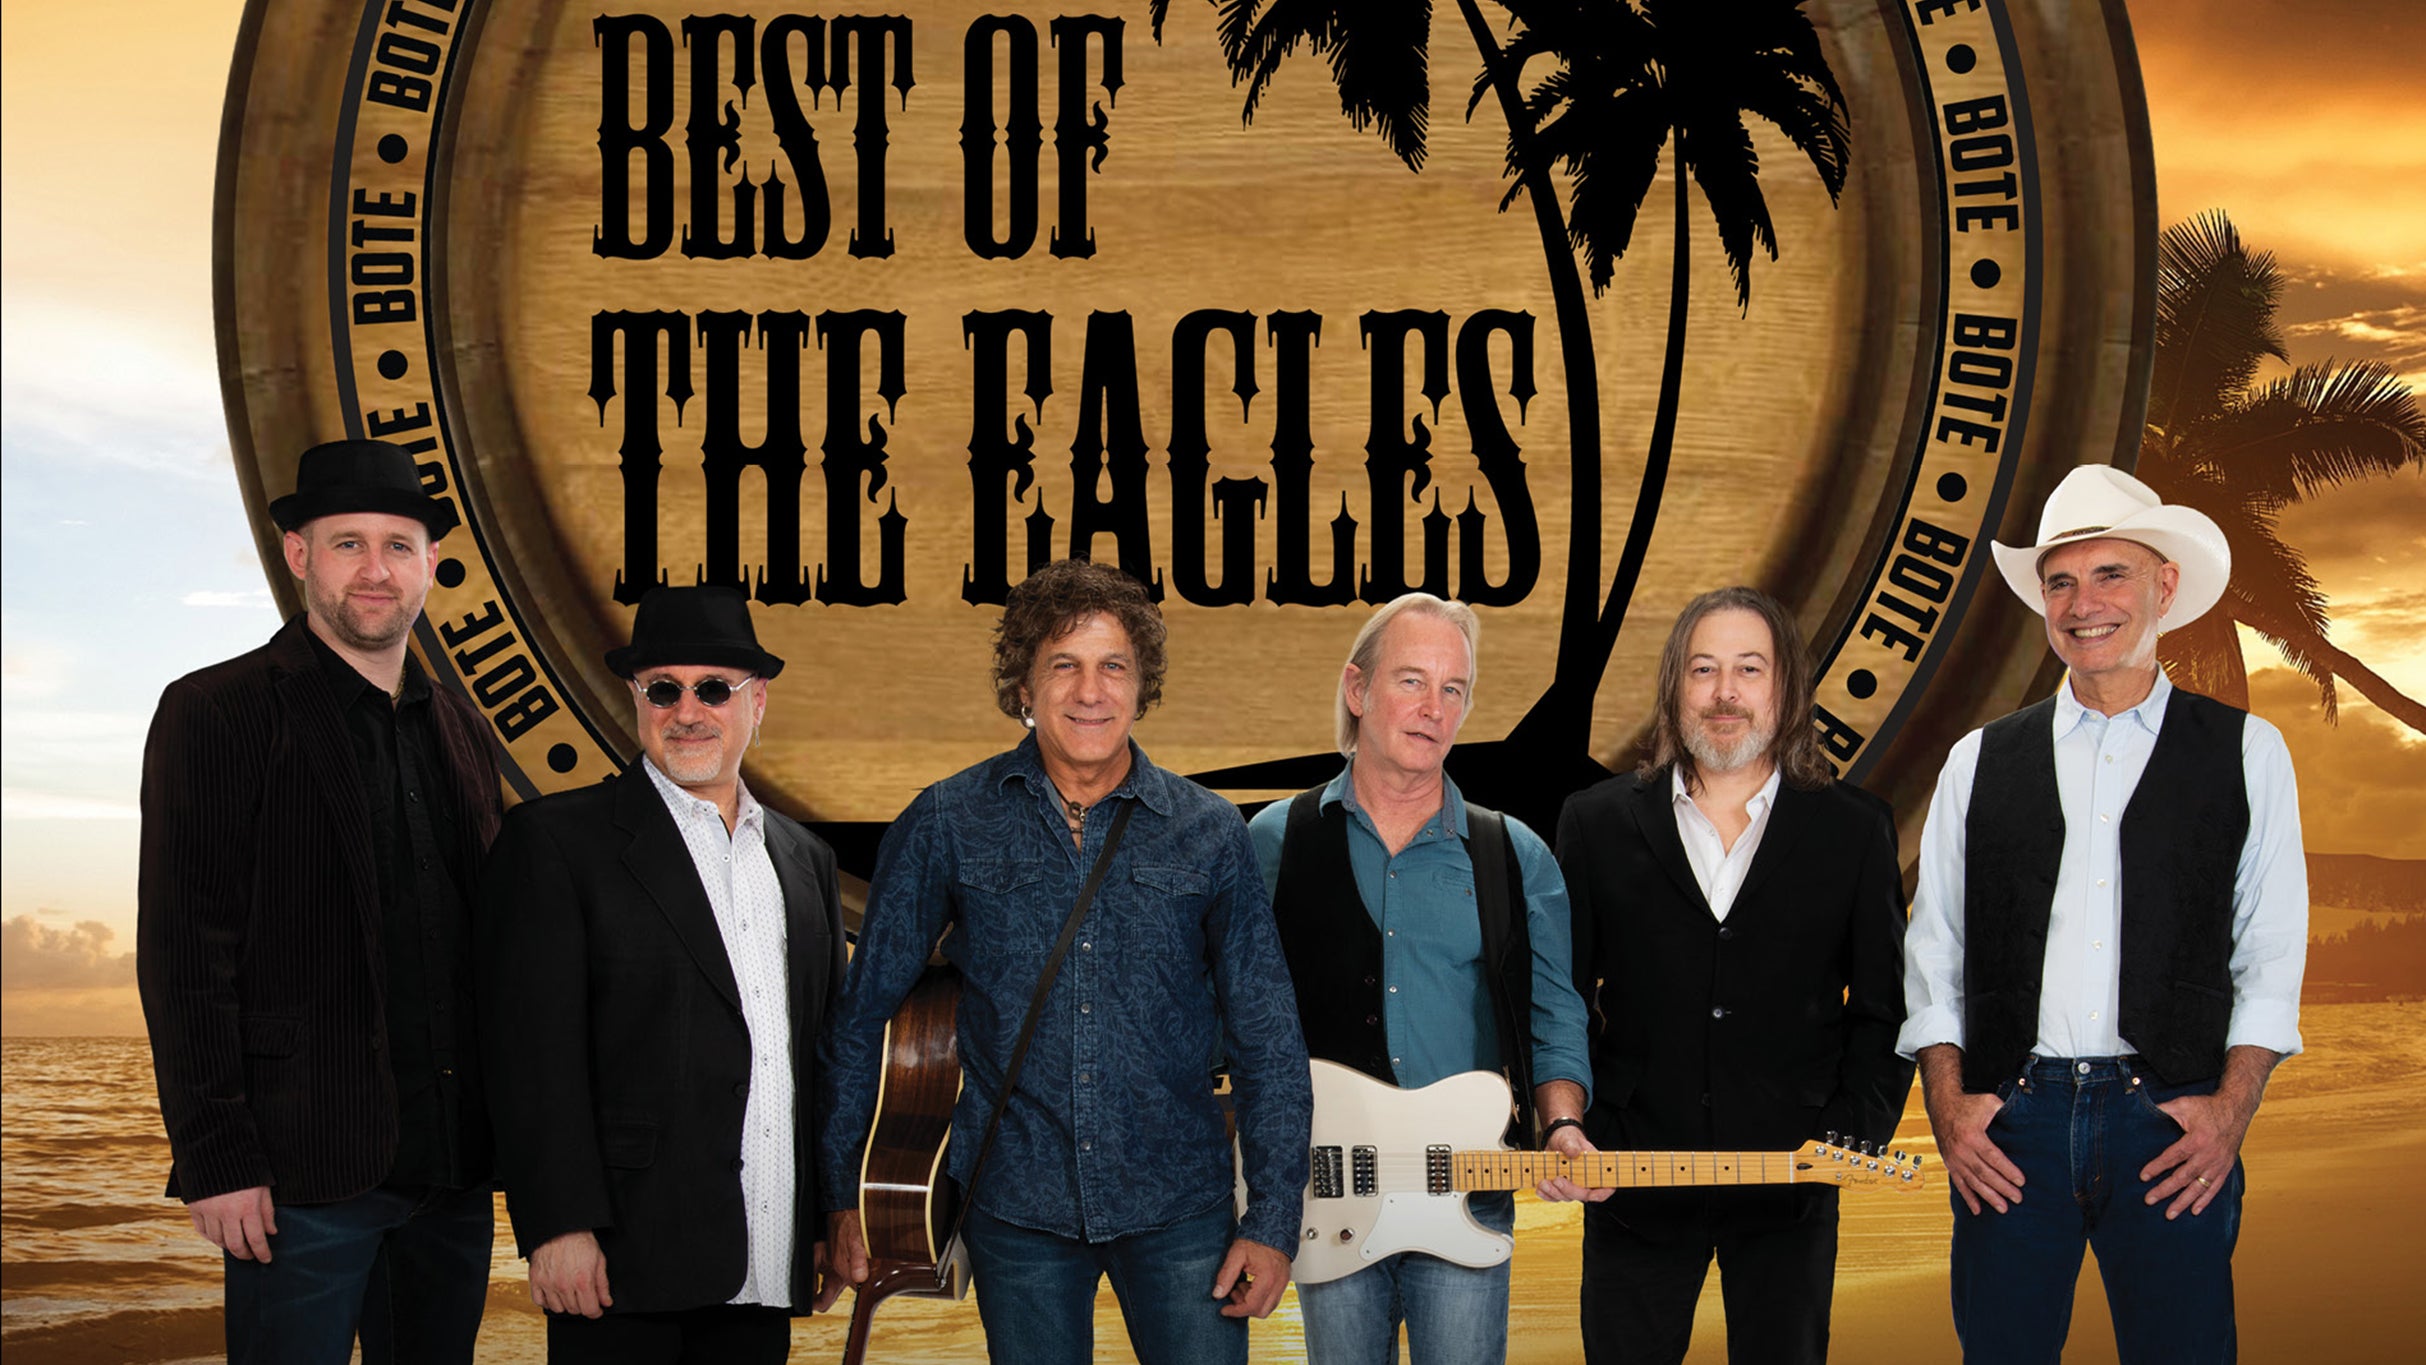 Best Of The Eagles presales in Schenectady